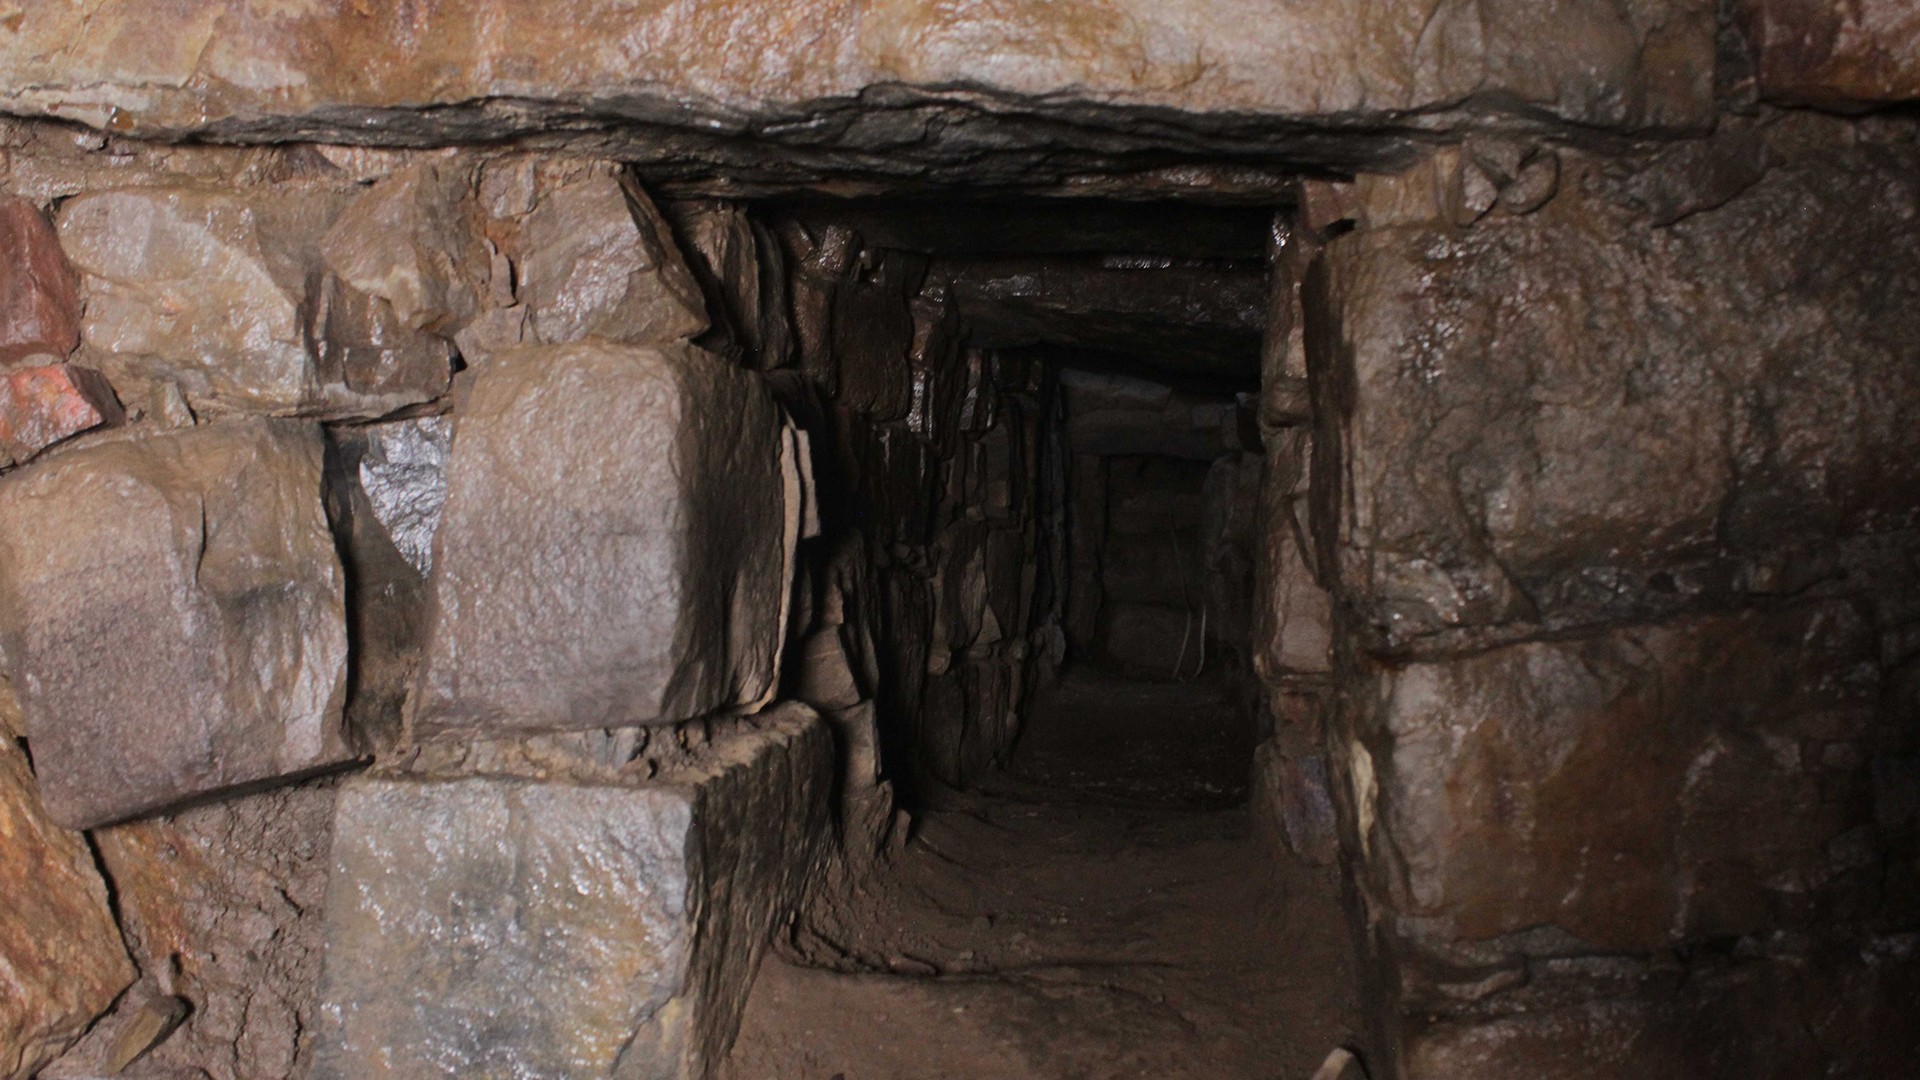 This image shows one of the sealed passages within the Chavín de Huántar temple complex, Peru.